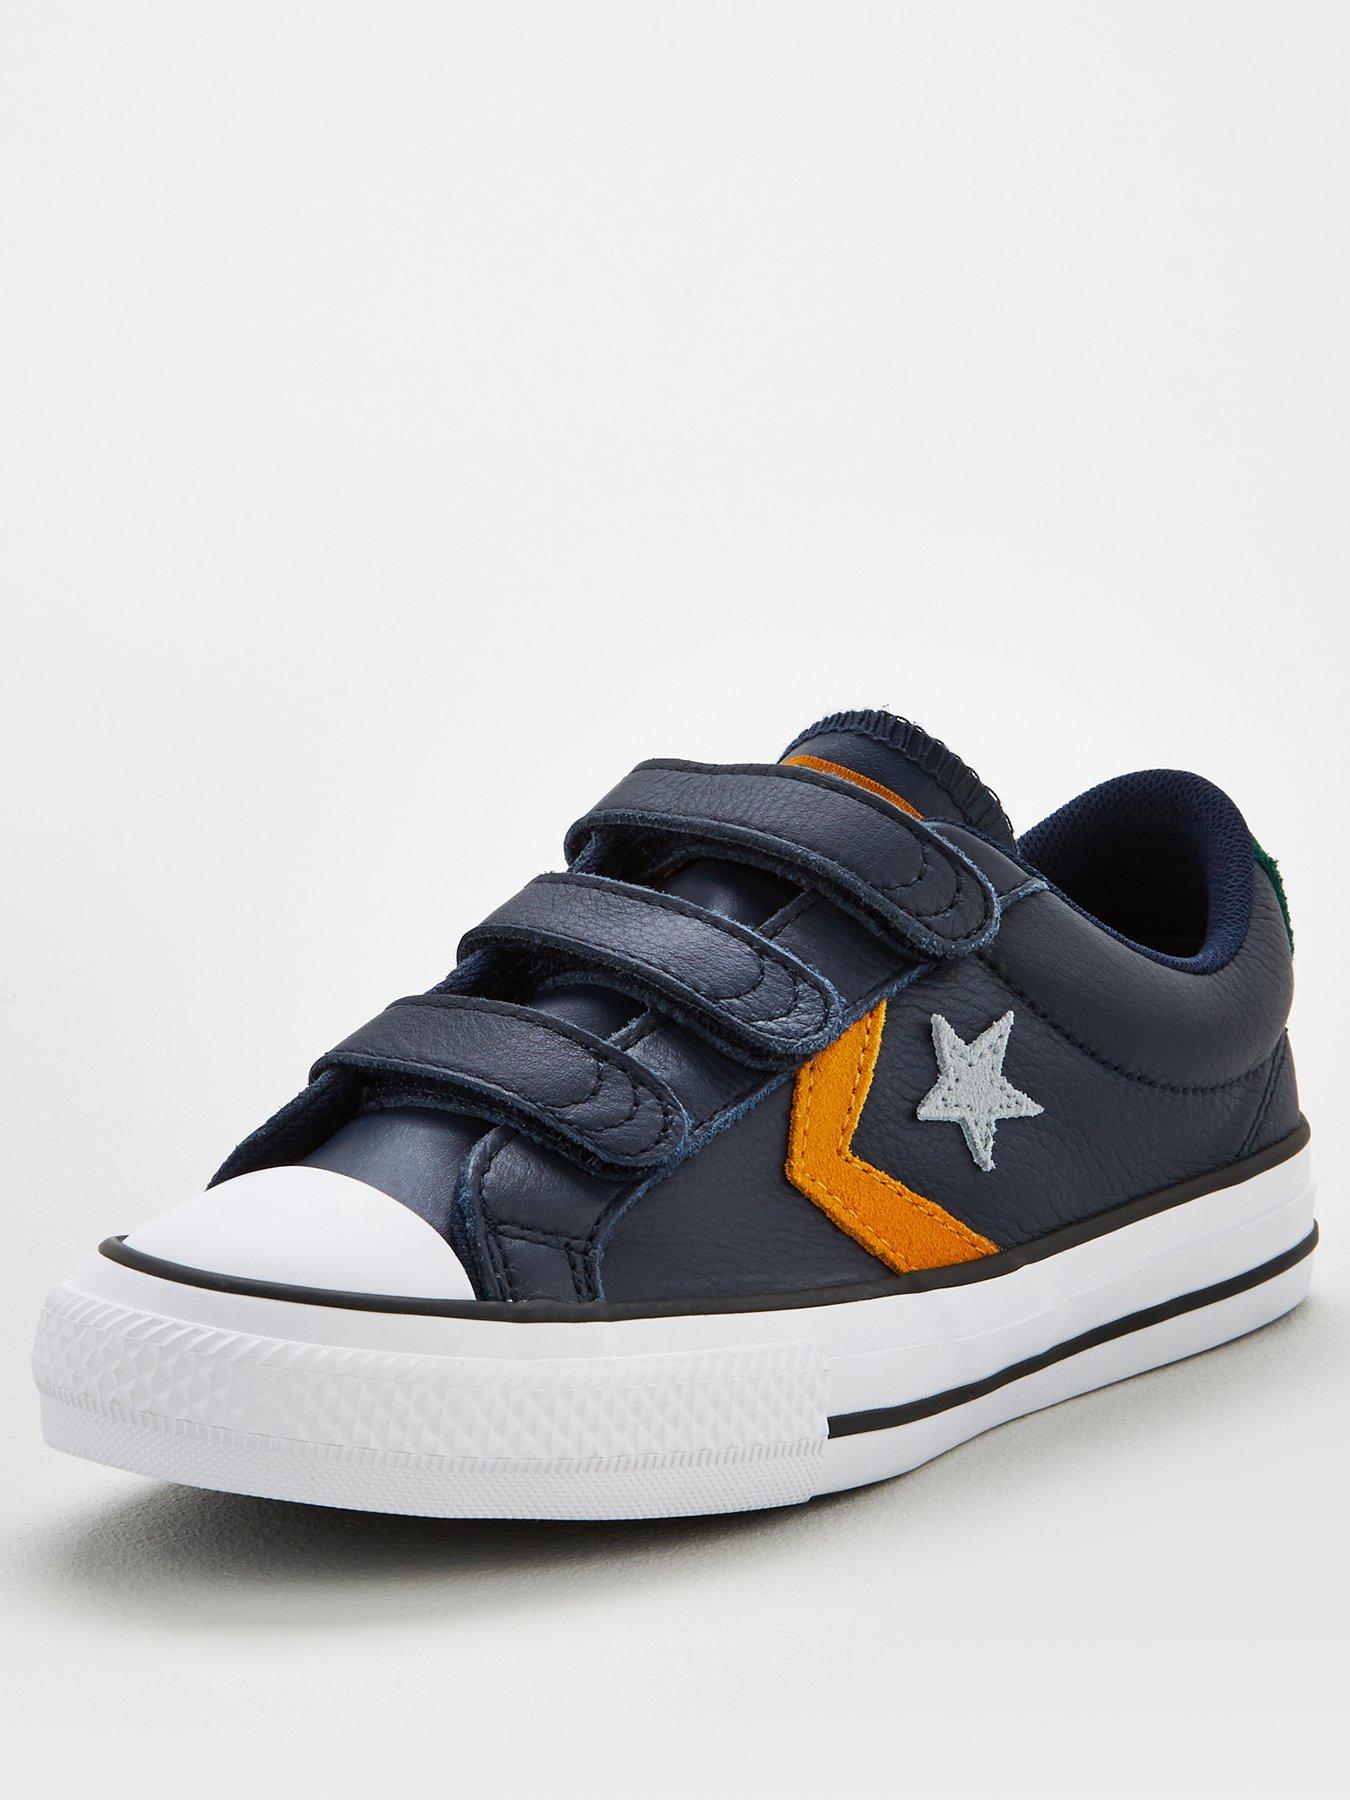 Converse Star Player Ox 3v Leather Junior Trainer - Grey Yellow | very.co.uk